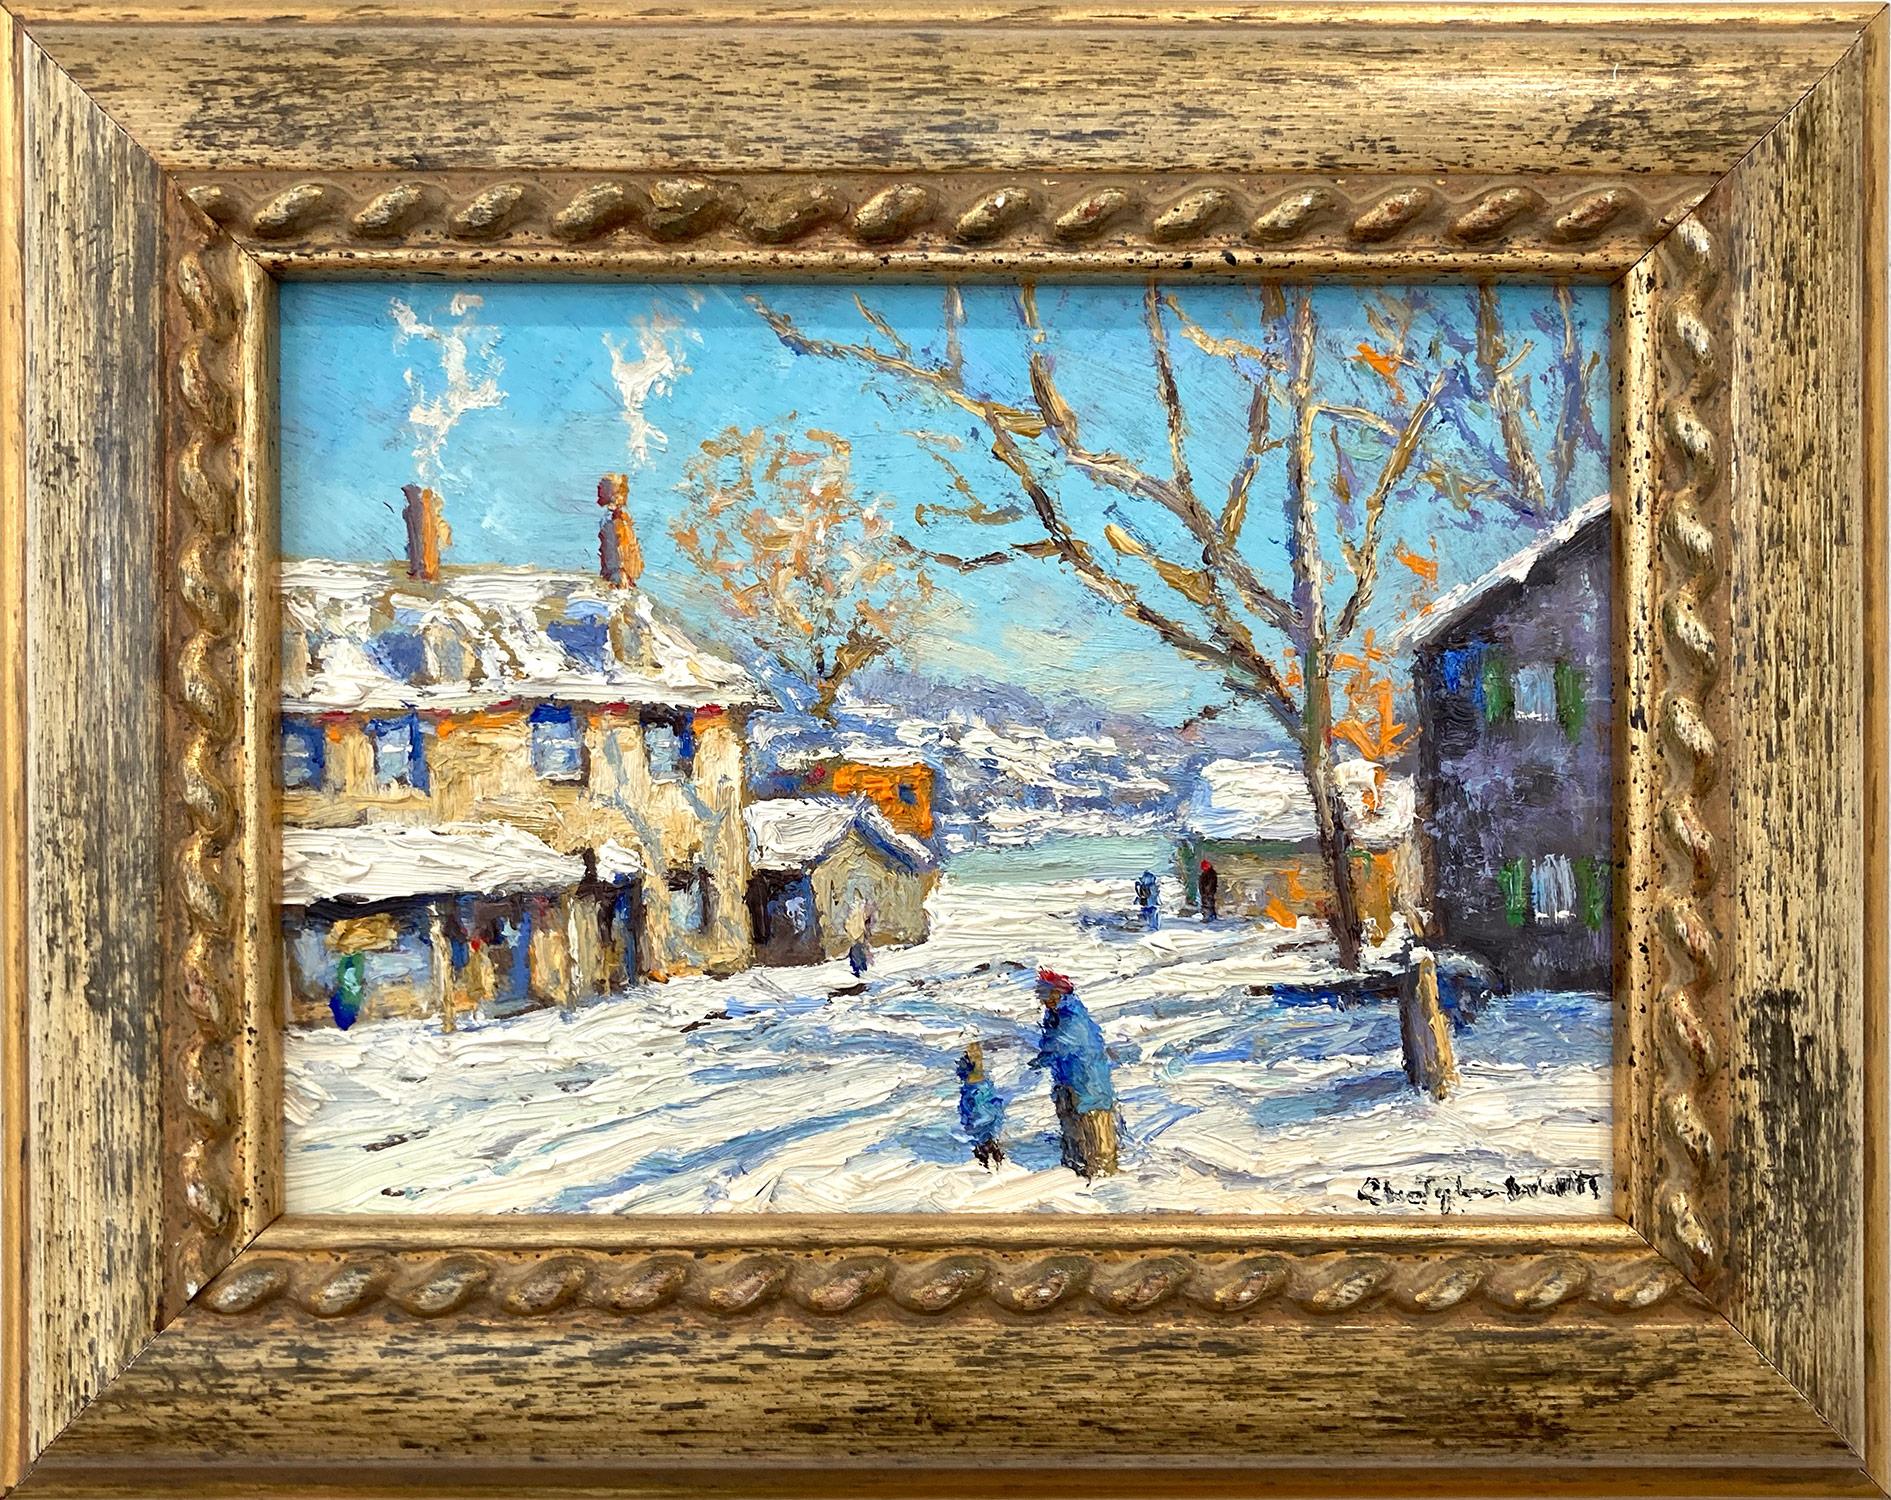 Christopher Willett Landscape Painting - "New Hope PA" Bucks County PA, Pastoral Winter Snow Landscape Oil Painting